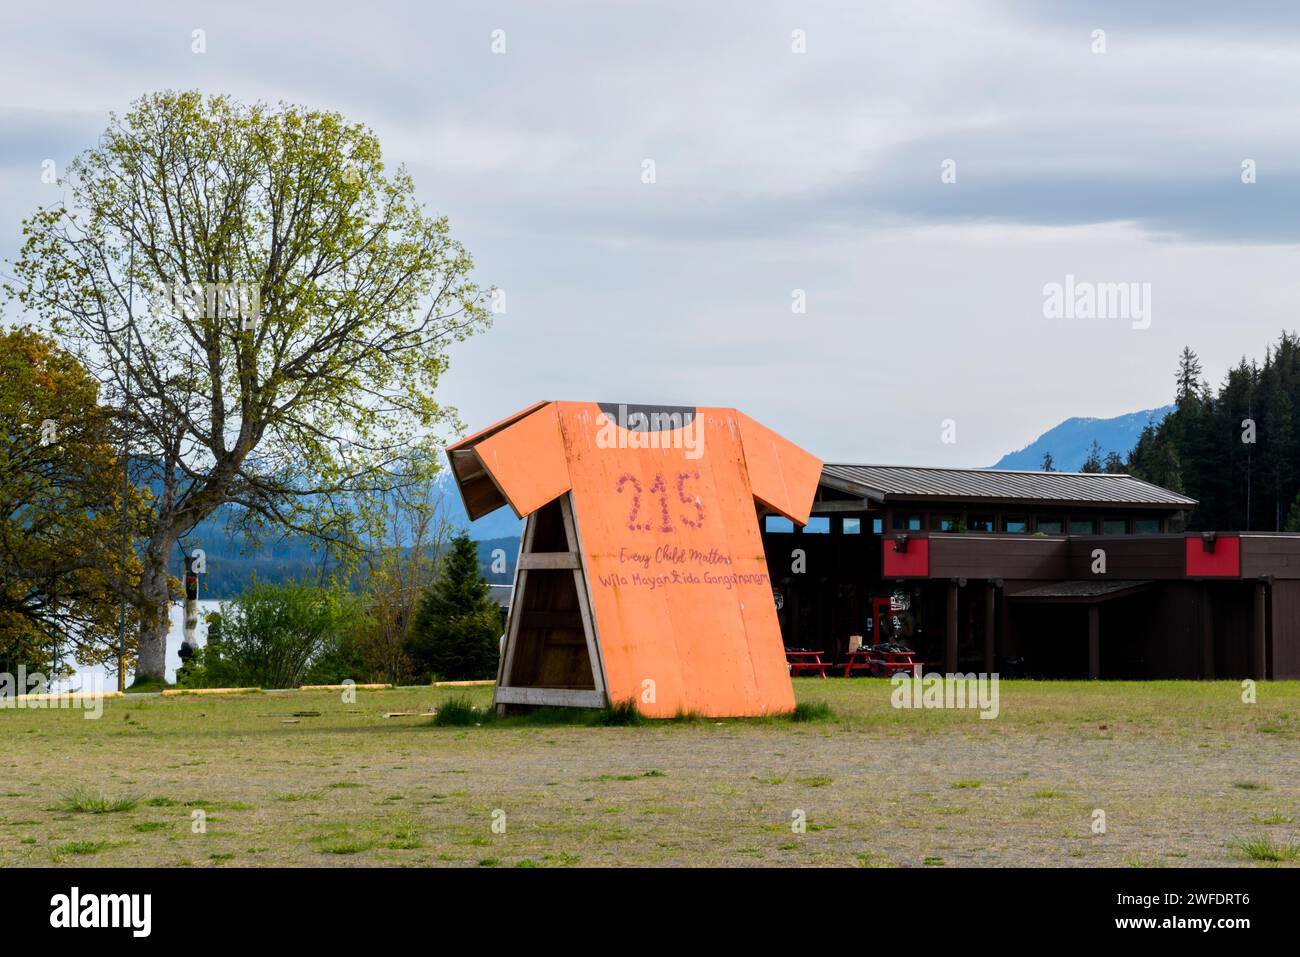 A large public art cut-out of an orange shirt memorializes the loss of indigenous children in Canadian residential schools, in the community of Yalis Stock Photo